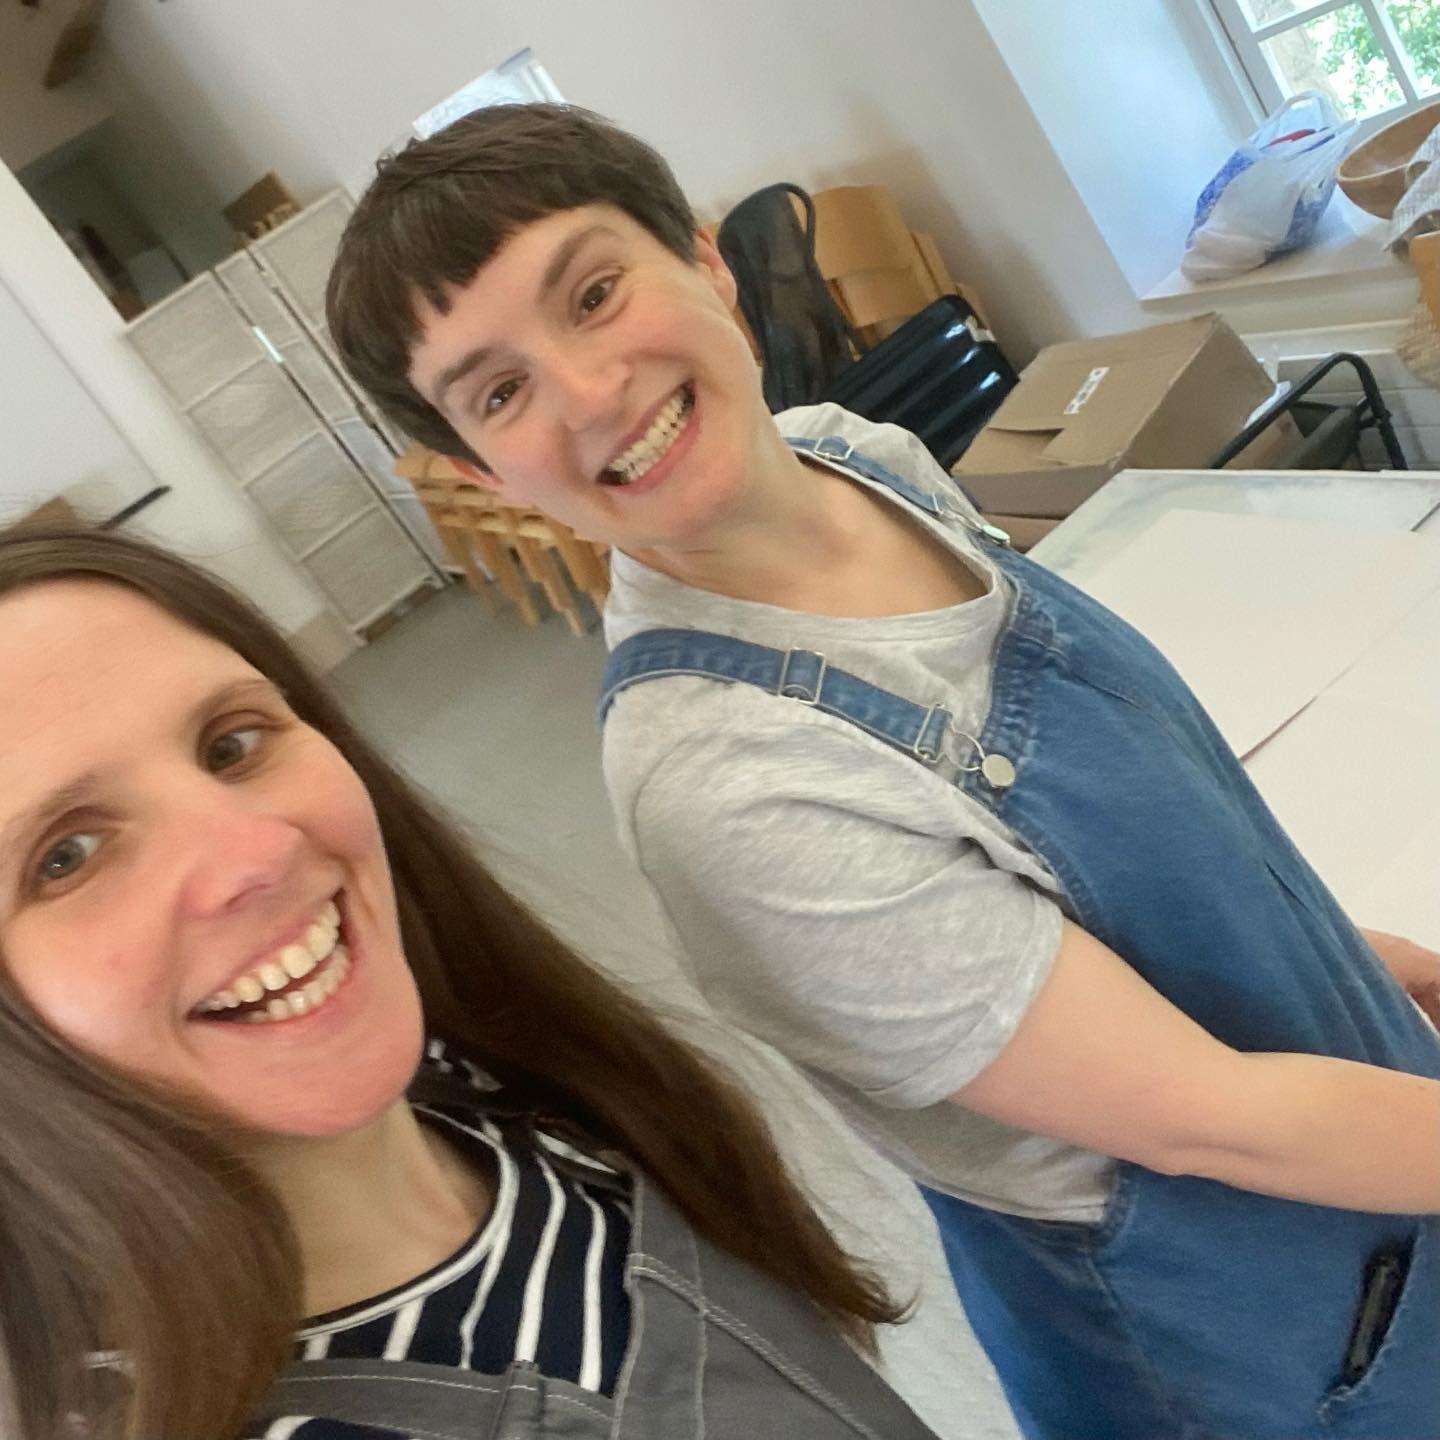 In the run up to Super Seconds Festival we&rsquo;re taking part in the @supersecondsfestival insta challenge. The first promt is &lsquo;about us&rsquo; so here goes&hellip; 

We&rsquo;re Ruth and Sarah (Ruth on the left, Sarah on the right) We&rsquo;